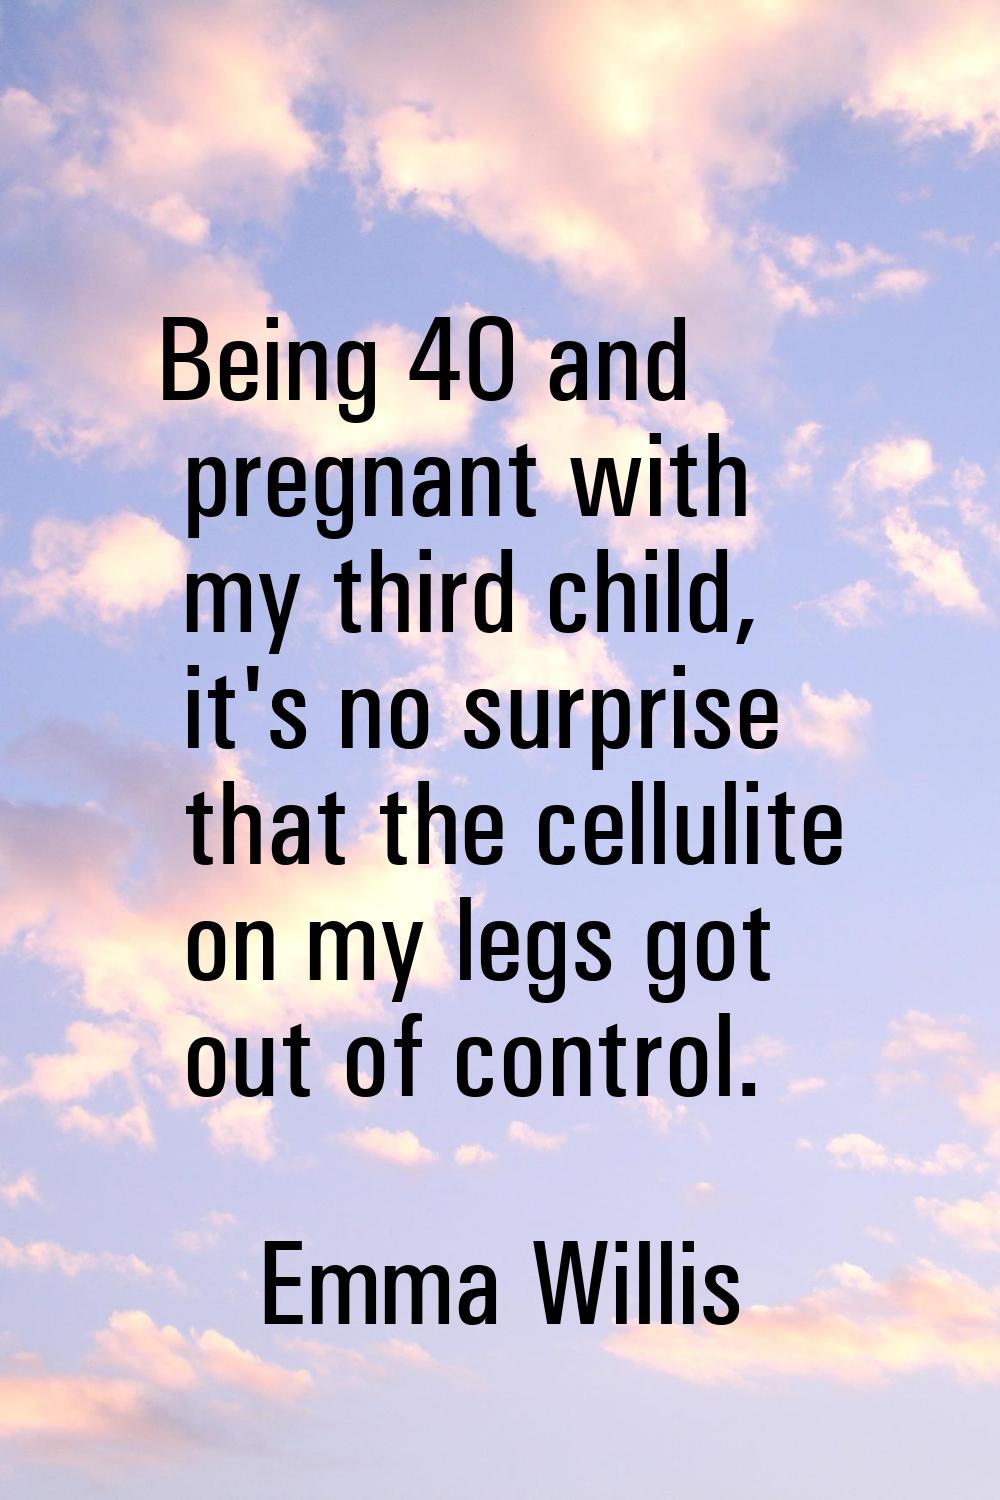 Being 40 and pregnant with my third child, it's no surprise that the cellulite on my legs got out o